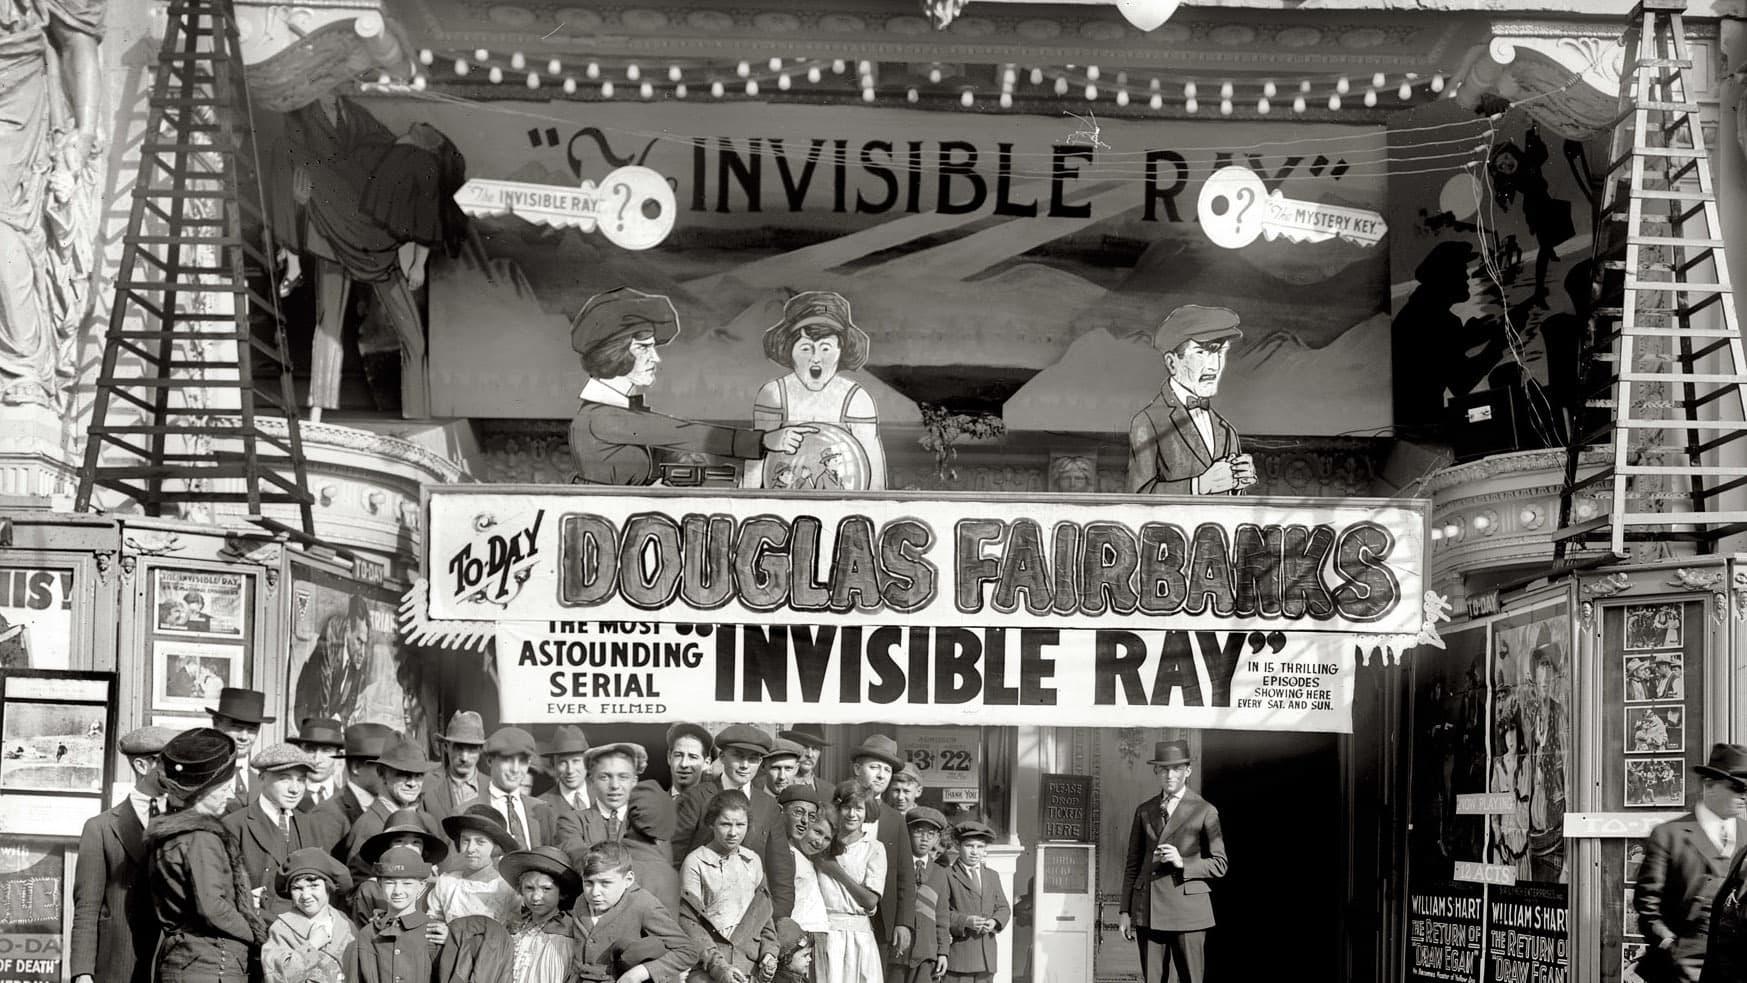 The Invisible Ray backdrop